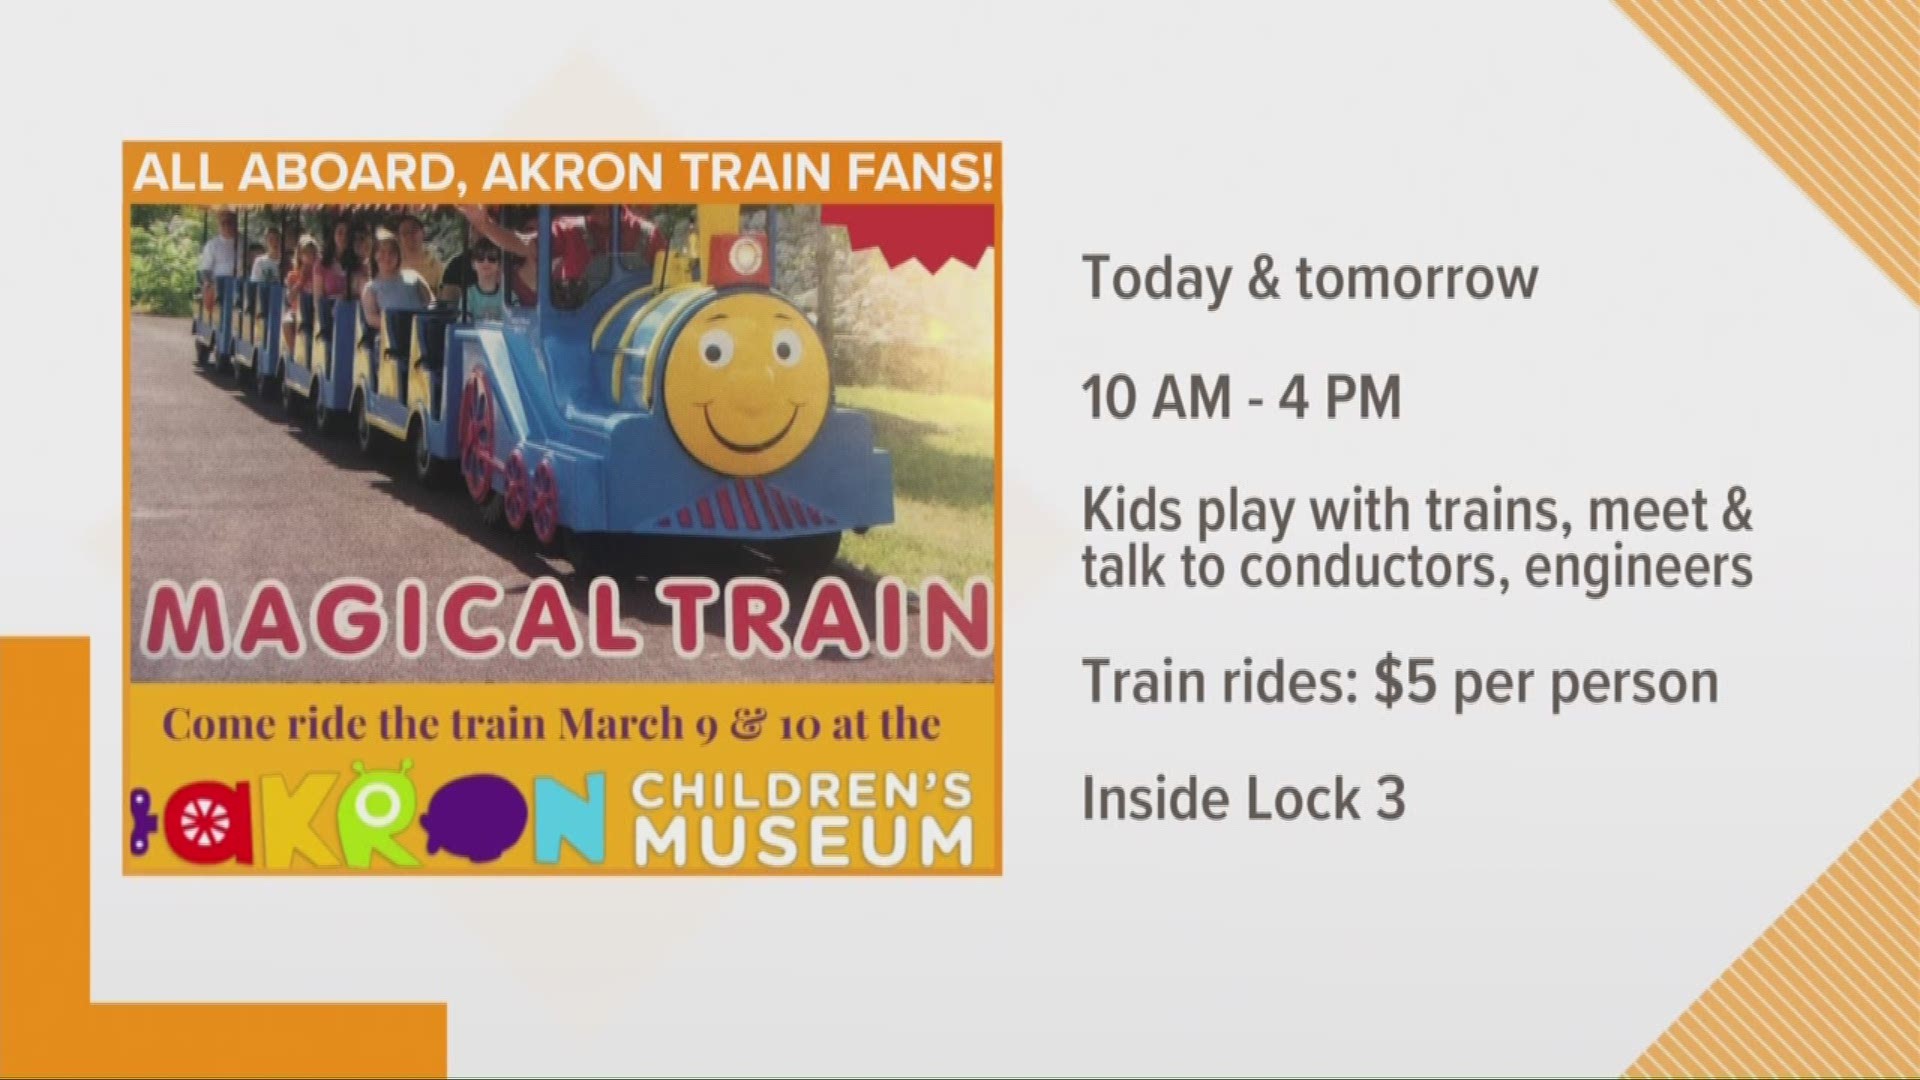 Lindsay shows us all the fun going on at the Akron Children's Museum.